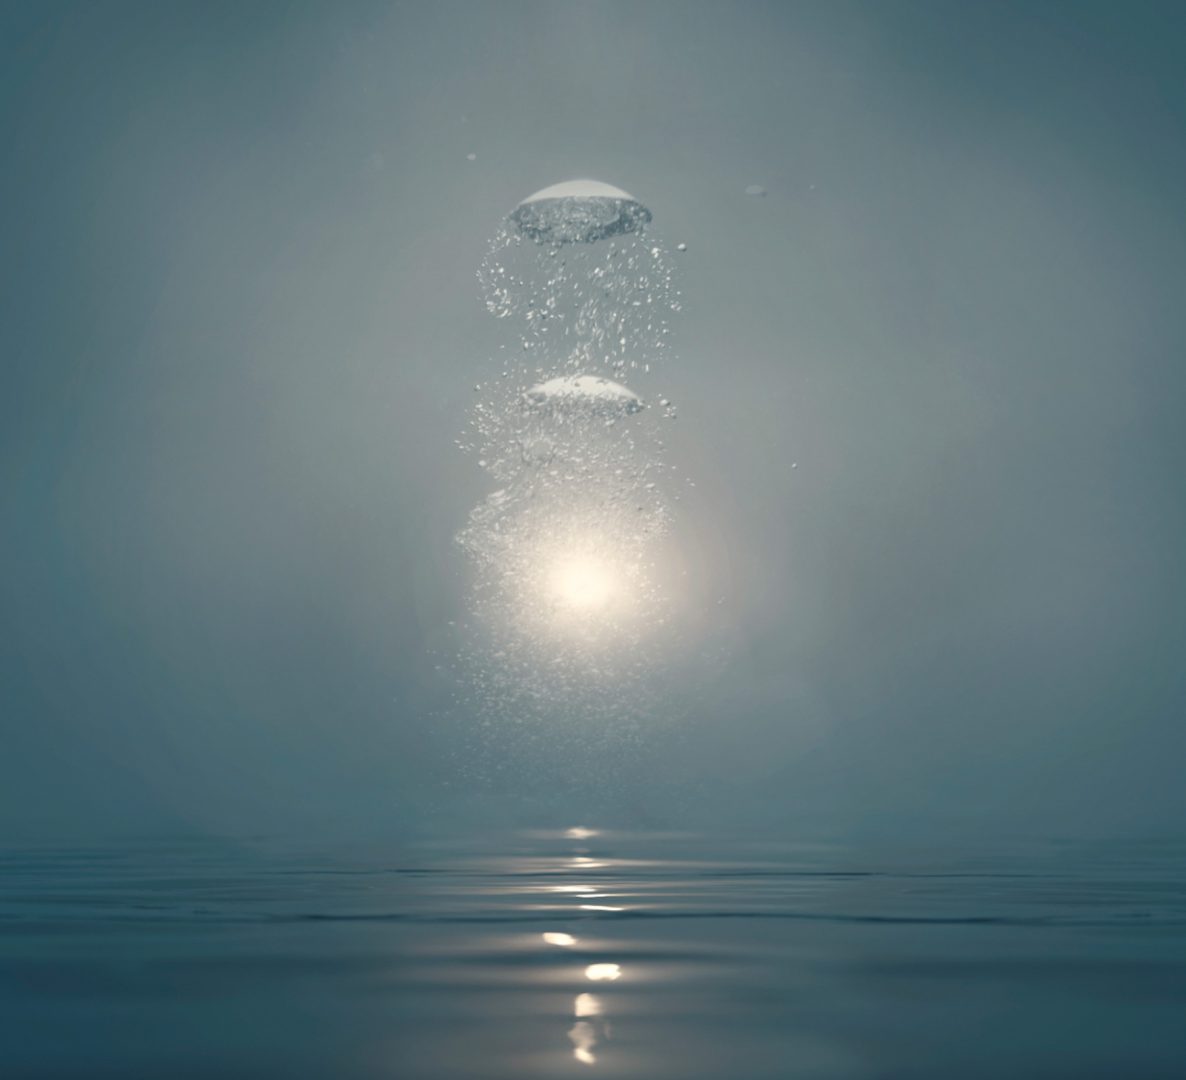 The moment when a water drop hits a calm water surface. A splash is created by the impact, with small water droplets spreading upwards. There is a bright light source behind the splash, illuminating the droplets and creating a glowing effect. The surrounding environment is calm and peaceful with subdued colors, which highlights the brightness of the light source. The light's reflection on the water surface creates a path leading to the splash.